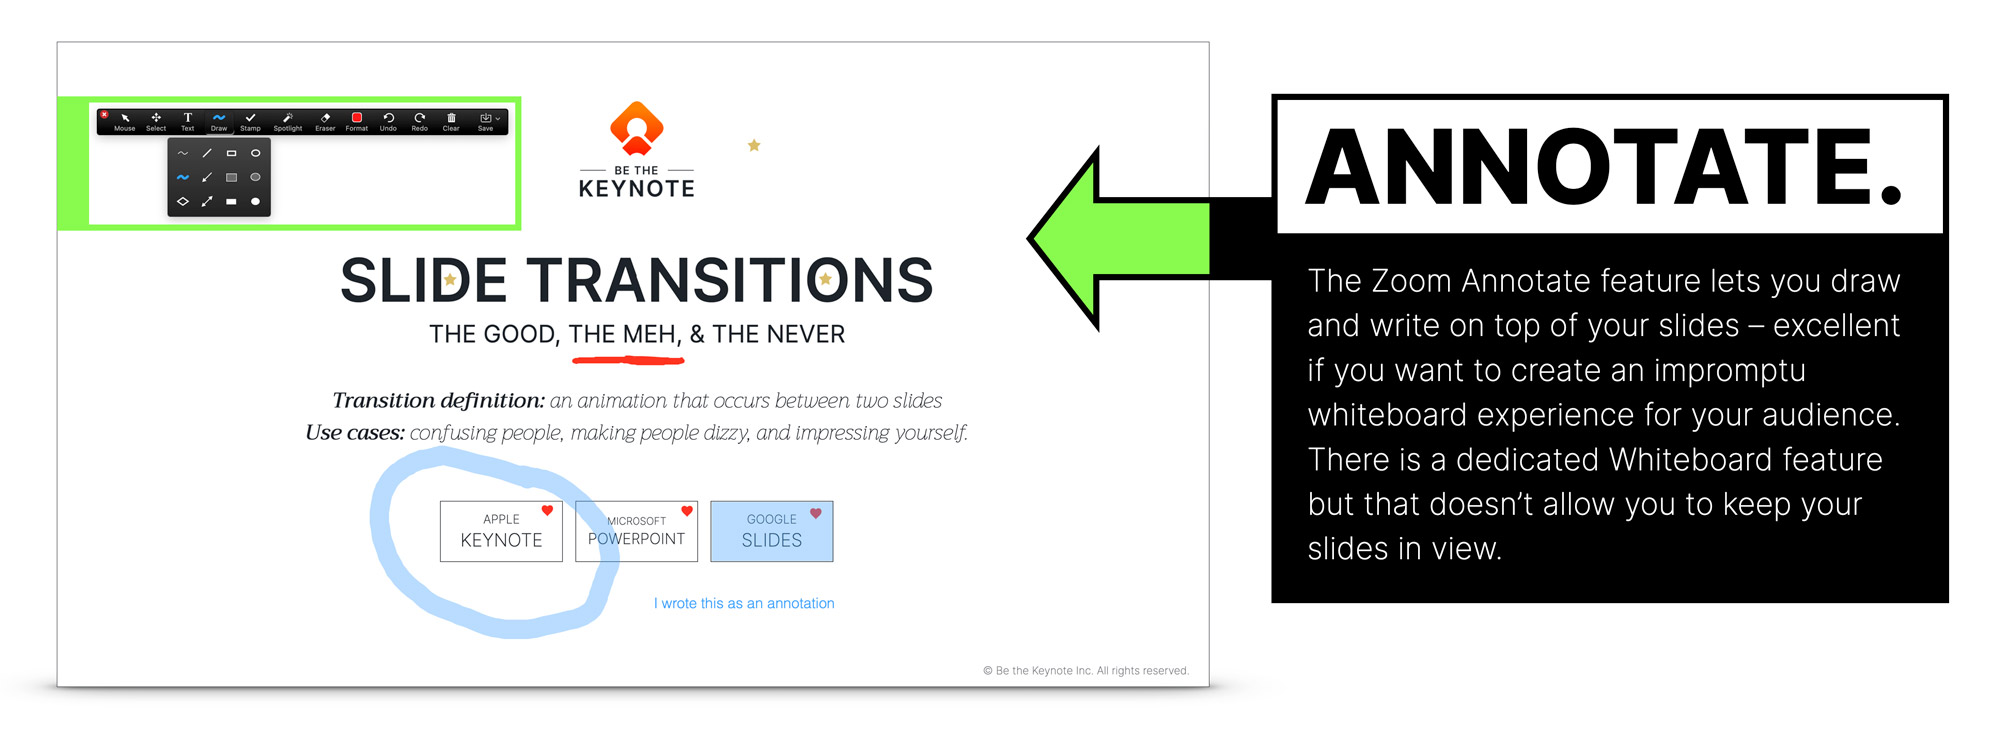 The Zoom annotation feature lets you mark up your slides.